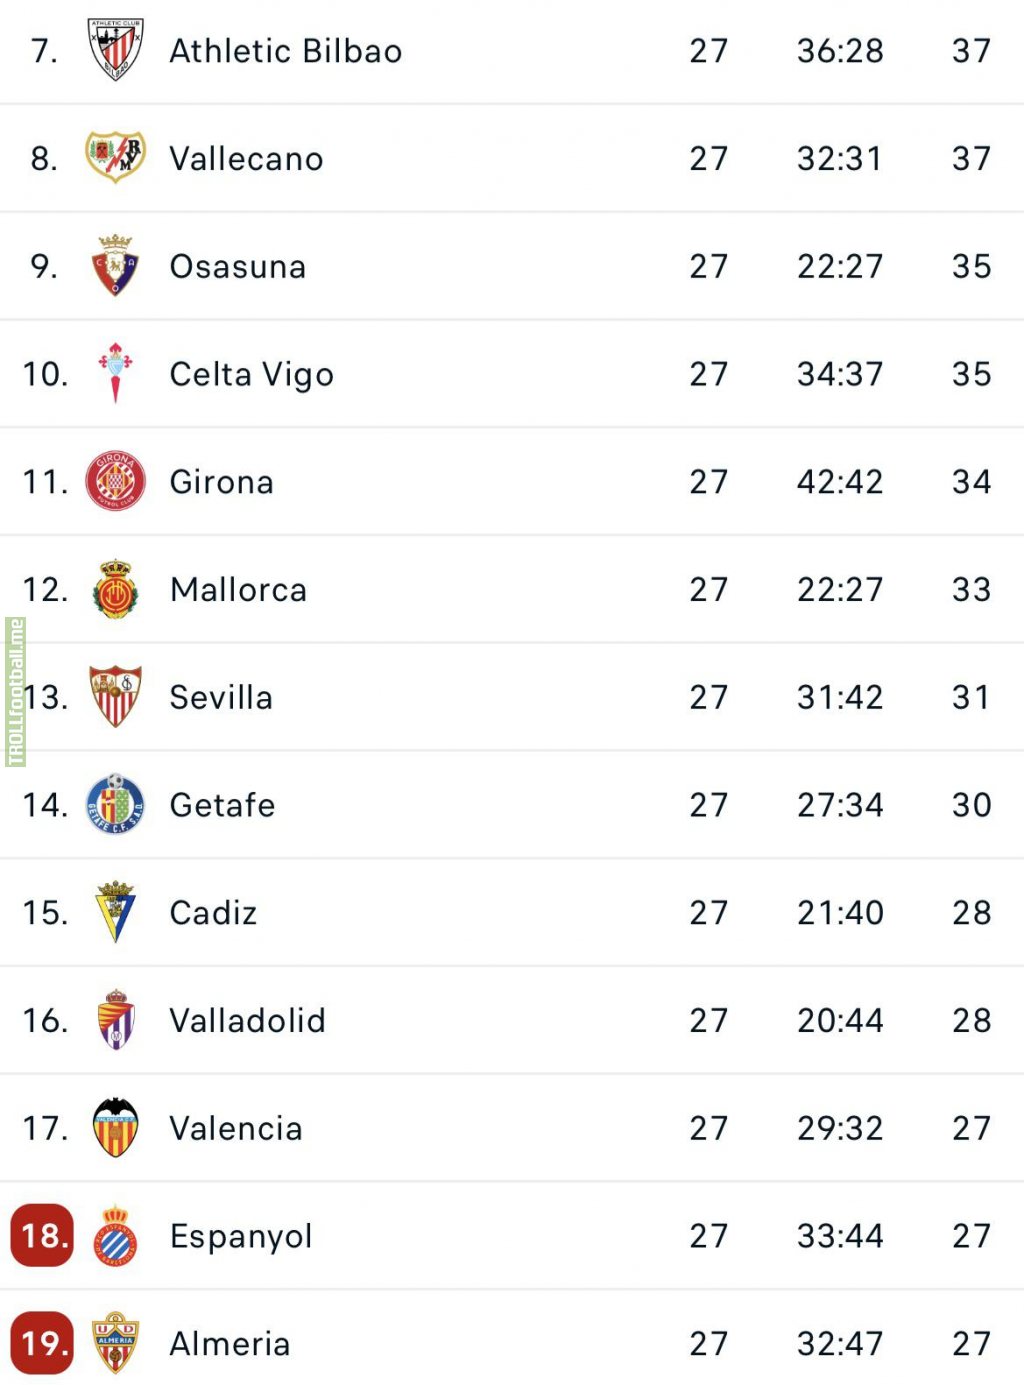 13 LaLiga teams are within 10 points battling for Europe and relegation.